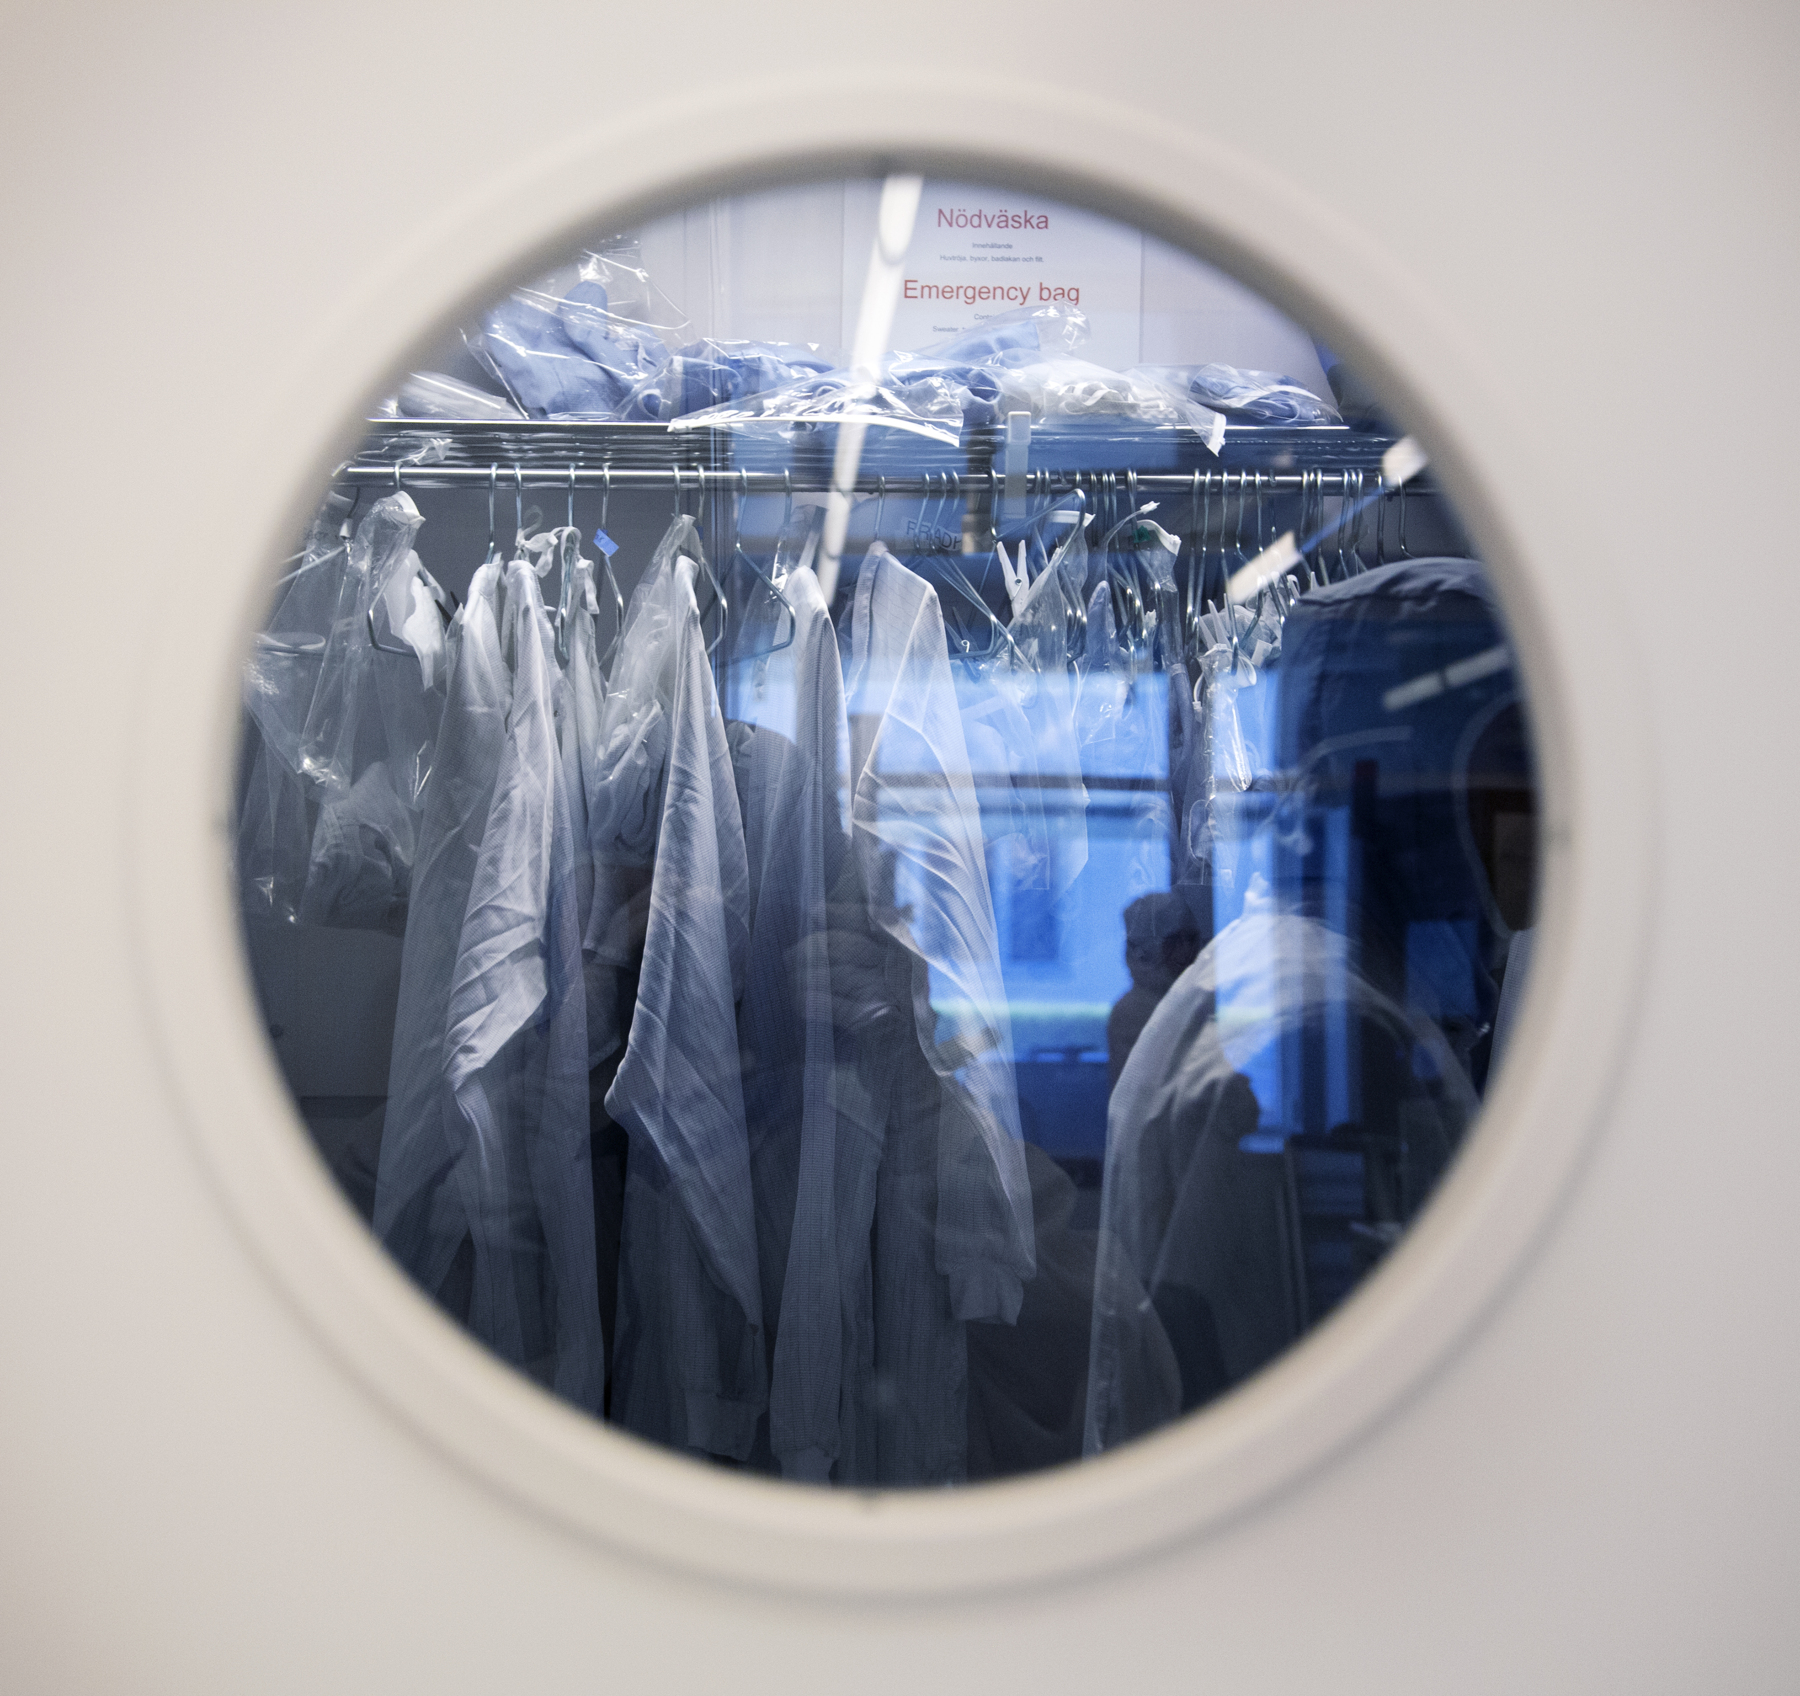 White lab coats are seen through a round window in a white door. Photo.